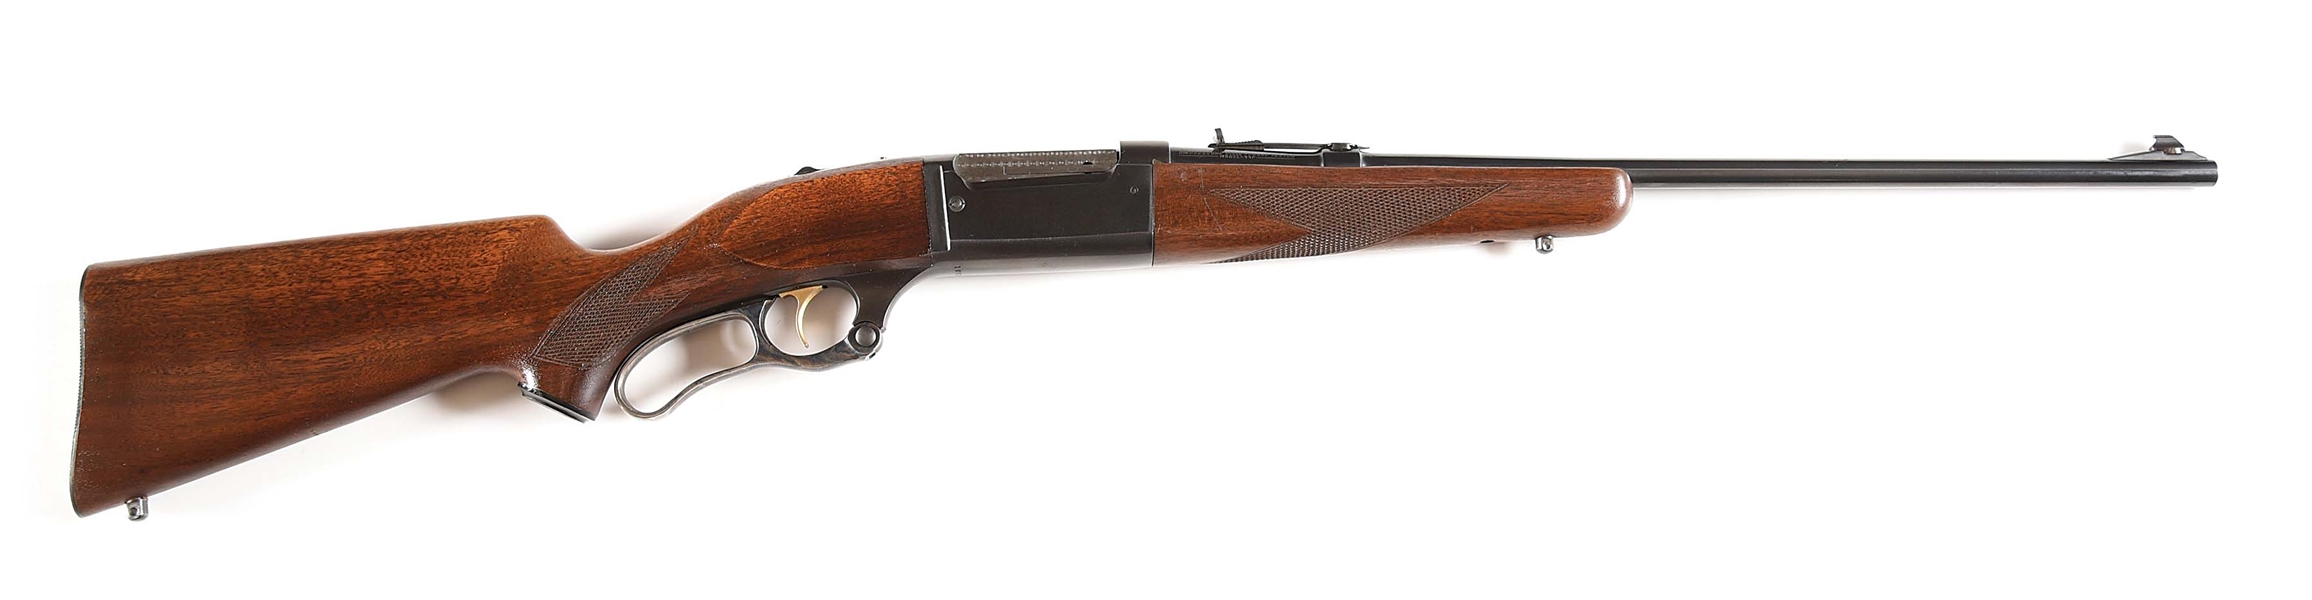 Savage Model Lever Action Rifle Chambered In Winchester Barnebys My XXX Hot Girl